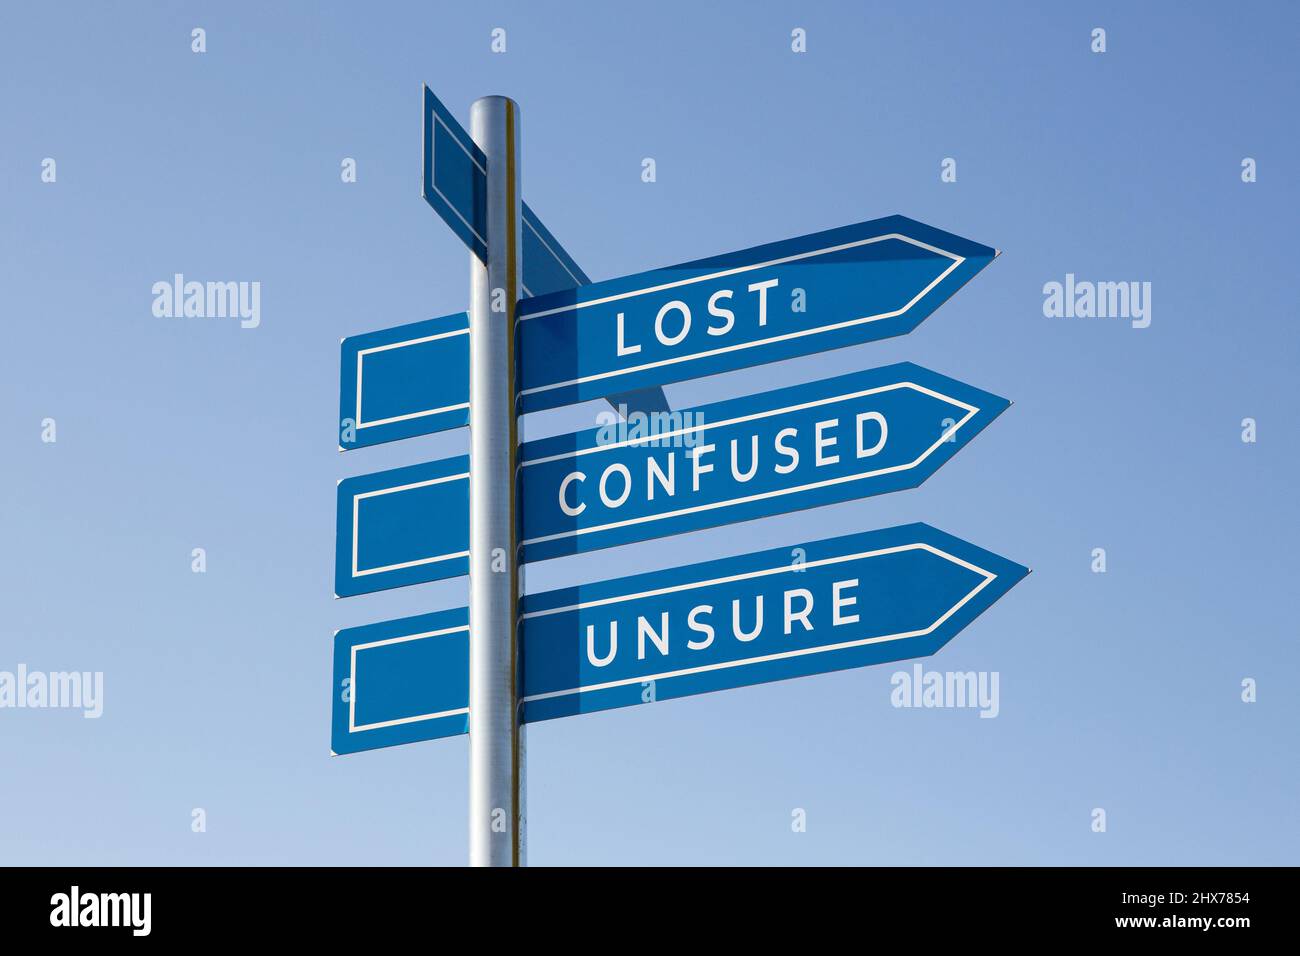 Lost confused unsure words on signpost isolated on sky background Stock Photo